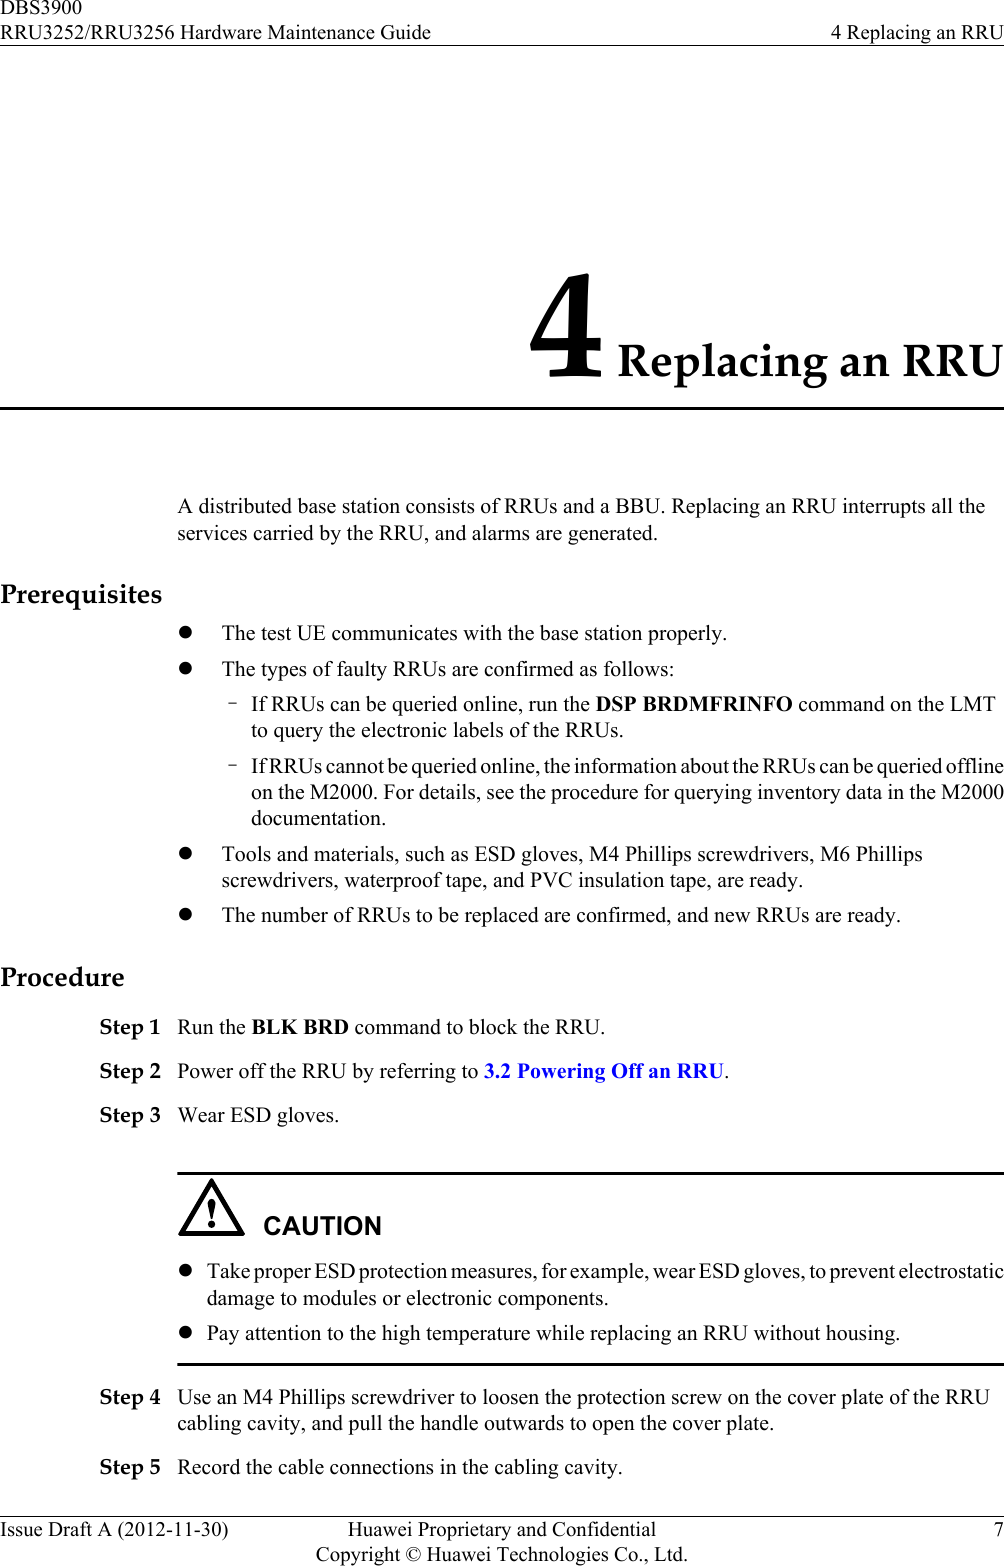 4 Replacing an RRUA distributed base station consists of RRUs and a BBU. Replacing an RRU interrupts all theservices carried by the RRU, and alarms are generated.PrerequisiteslThe test UE communicates with the base station properly.lThe types of faulty RRUs are confirmed as follows:–If RRUs can be queried online, run the DSP BRDMFRINFO command on the LMTto query the electronic labels of the RRUs.–If RRUs cannot be queried online, the information about the RRUs can be queried offlineon the M2000. For details, see the procedure for querying inventory data in the M2000documentation.lTools and materials, such as ESD gloves, M4 Phillips screwdrivers, M6 Phillipsscrewdrivers, waterproof tape, and PVC insulation tape, are ready.lThe number of RRUs to be replaced are confirmed, and new RRUs are ready.ProcedureStep 1 Run the BLK BRD command to block the RRU.Step 2 Power off the RRU by referring to 3.2 Powering Off an RRU.Step 3 Wear ESD gloves.CAUTIONlTake proper ESD protection measures, for example, wear ESD gloves, to prevent electrostaticdamage to modules or electronic components.lPay attention to the high temperature while replacing an RRU without housing.Step 4 Use an M4 Phillips screwdriver to loosen the protection screw on the cover plate of the RRUcabling cavity, and pull the handle outwards to open the cover plate.Step 5 Record the cable connections in the cabling cavity.DBS3900RRU3252/RRU3256 Hardware Maintenance Guide 4 Replacing an RRUIssue Draft A (2012-11-30) Huawei Proprietary and ConfidentialCopyright © Huawei Technologies Co., Ltd.7